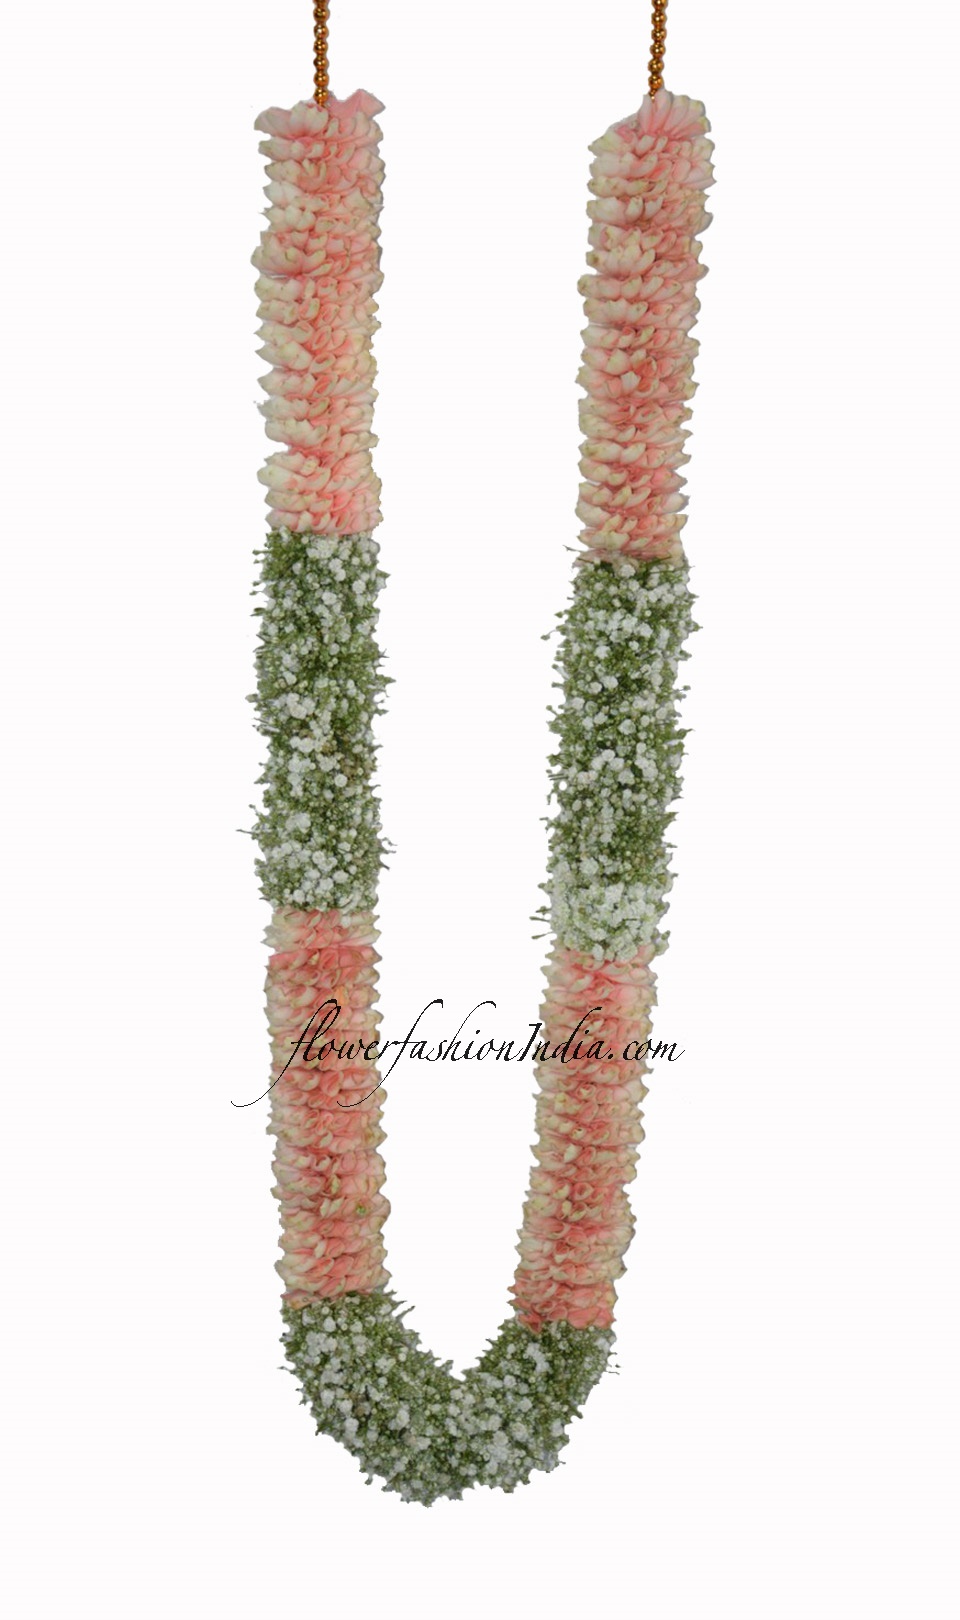 Natural Flower Wedding Garland Of Pink Rose Petals And Baby's ...